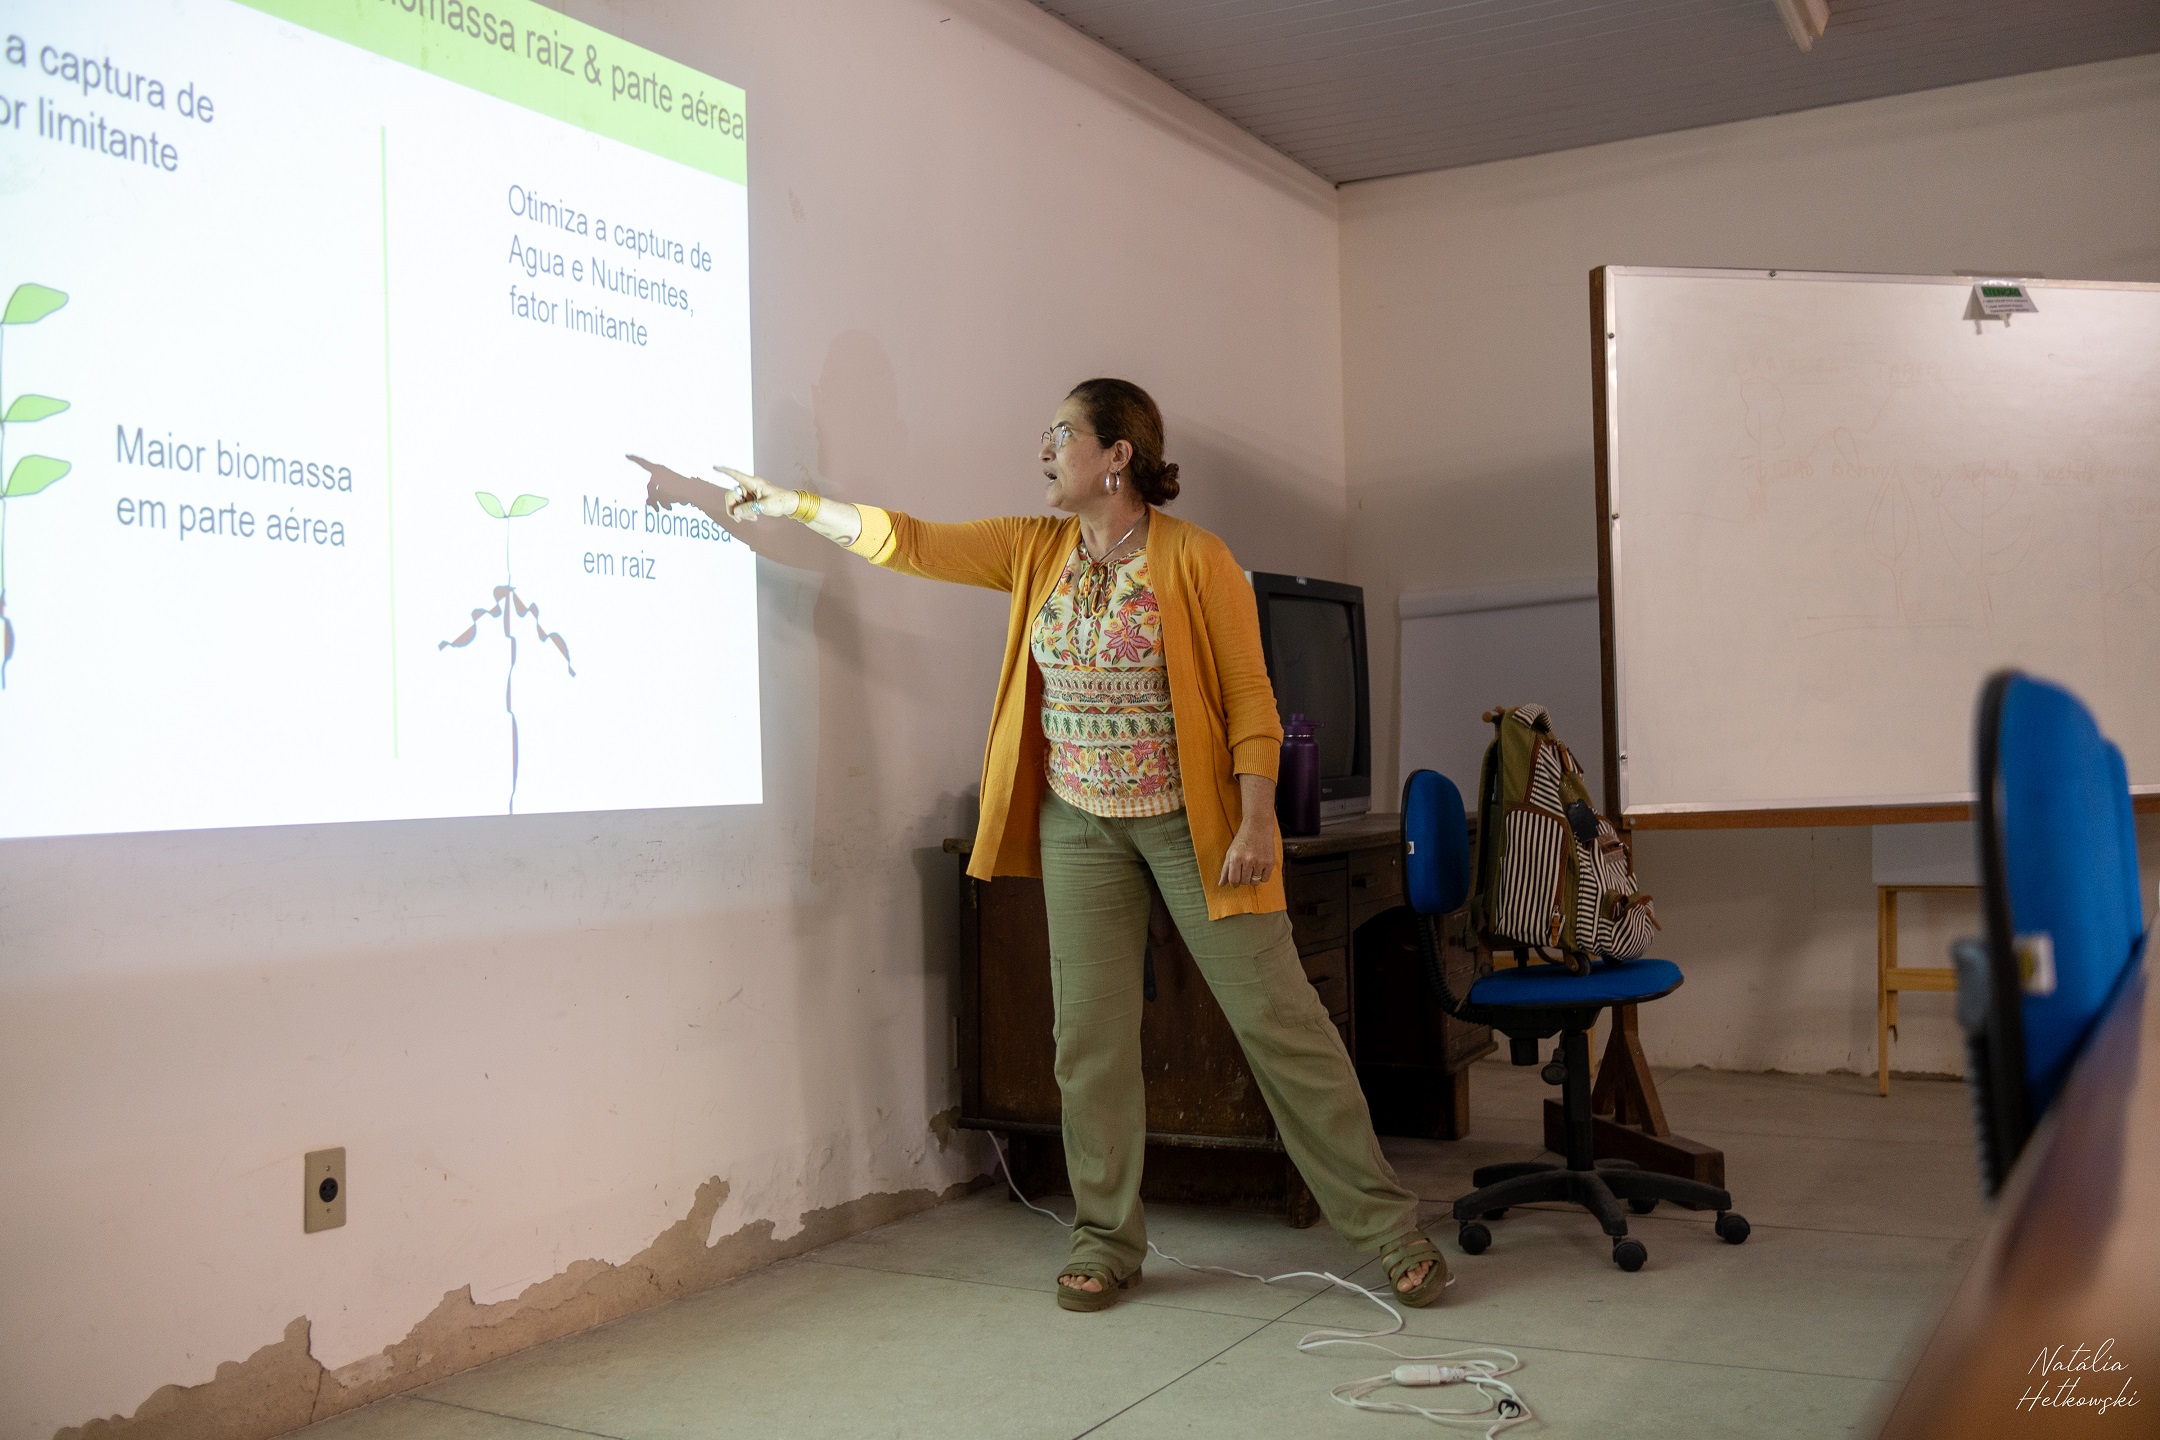 a woman pointing at a projector screen